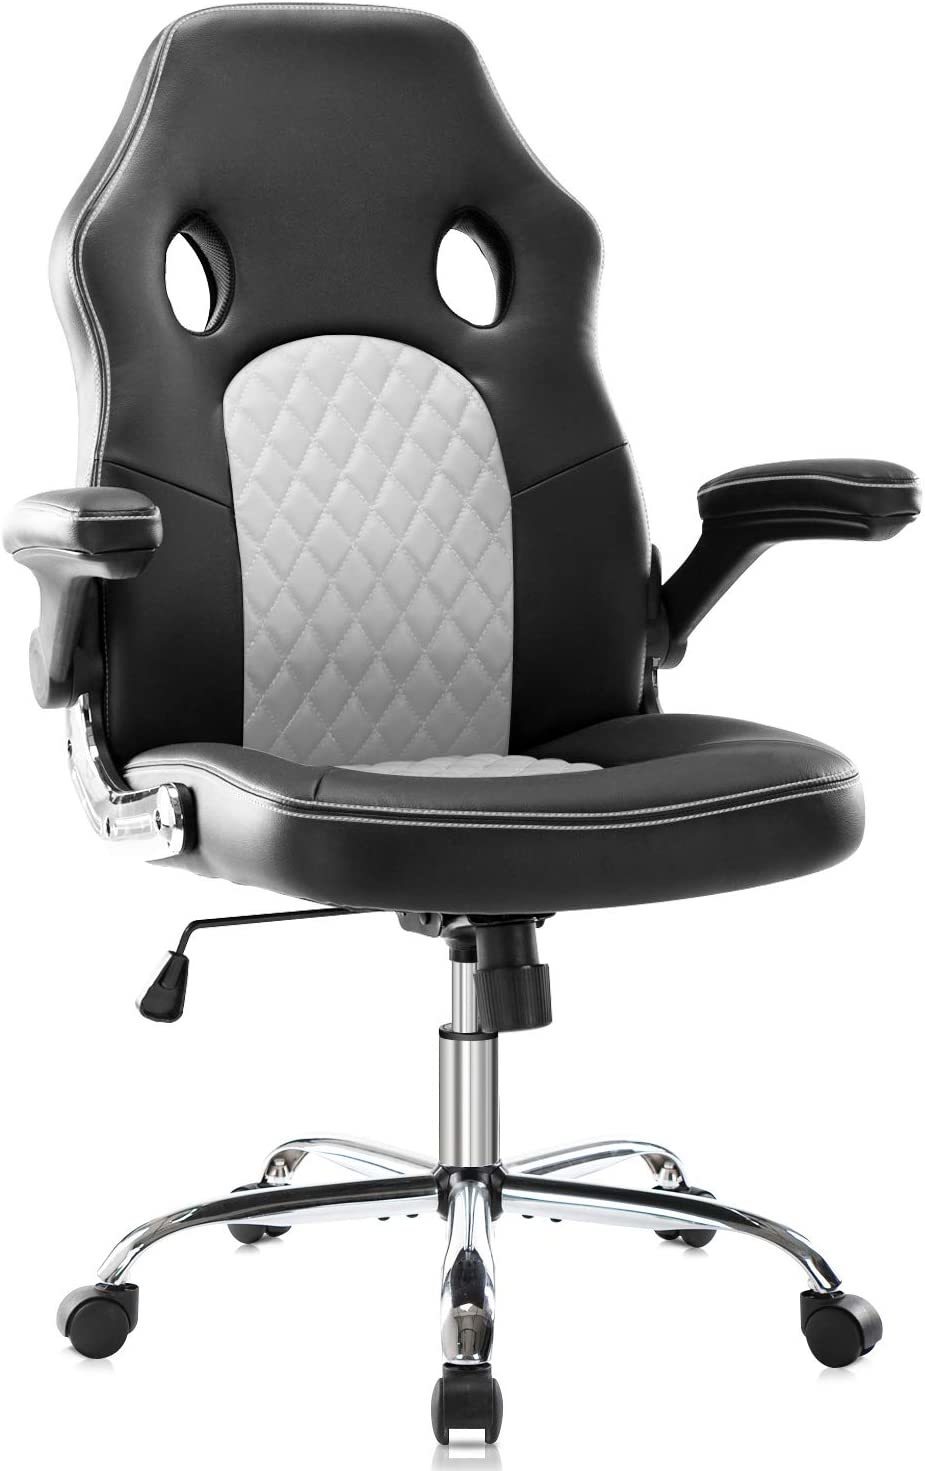 Primary image for Gaming Chair Ergonomic Office Chair PU Leather Computer Chair High Back, White